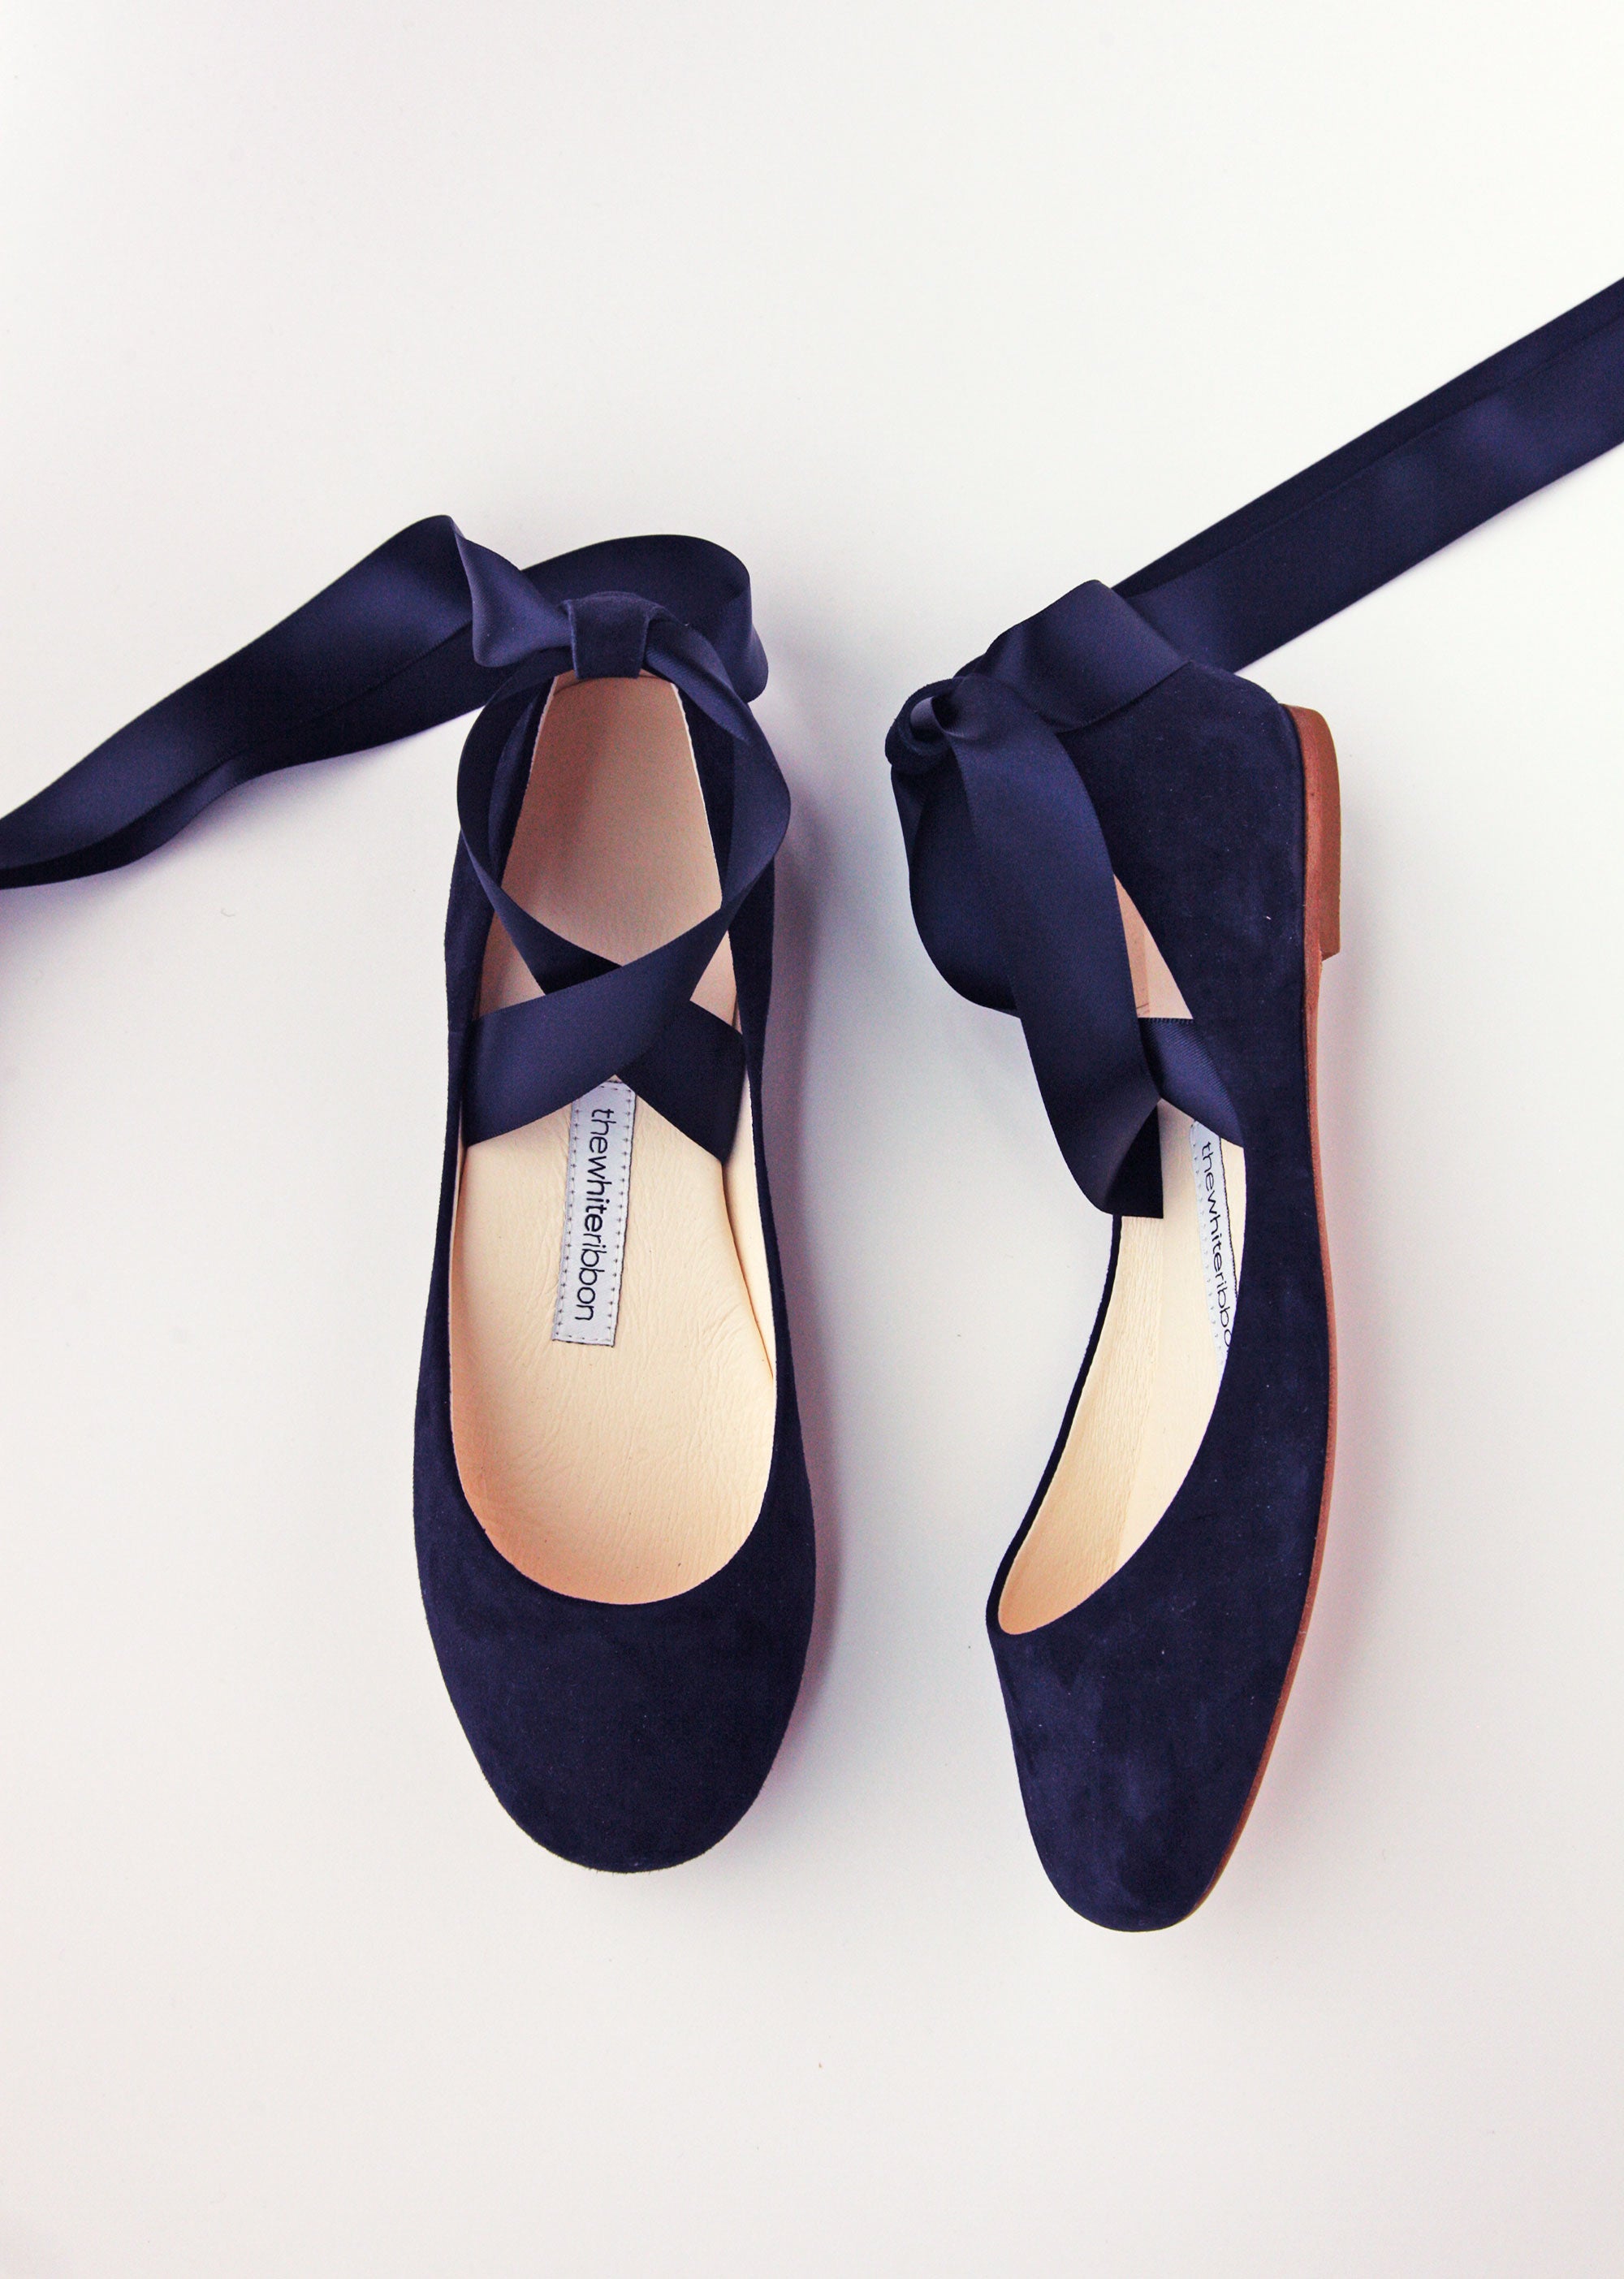 Wedding Bridal Ballet Flats and Oxford Leather Shoes – thewhiteribbon